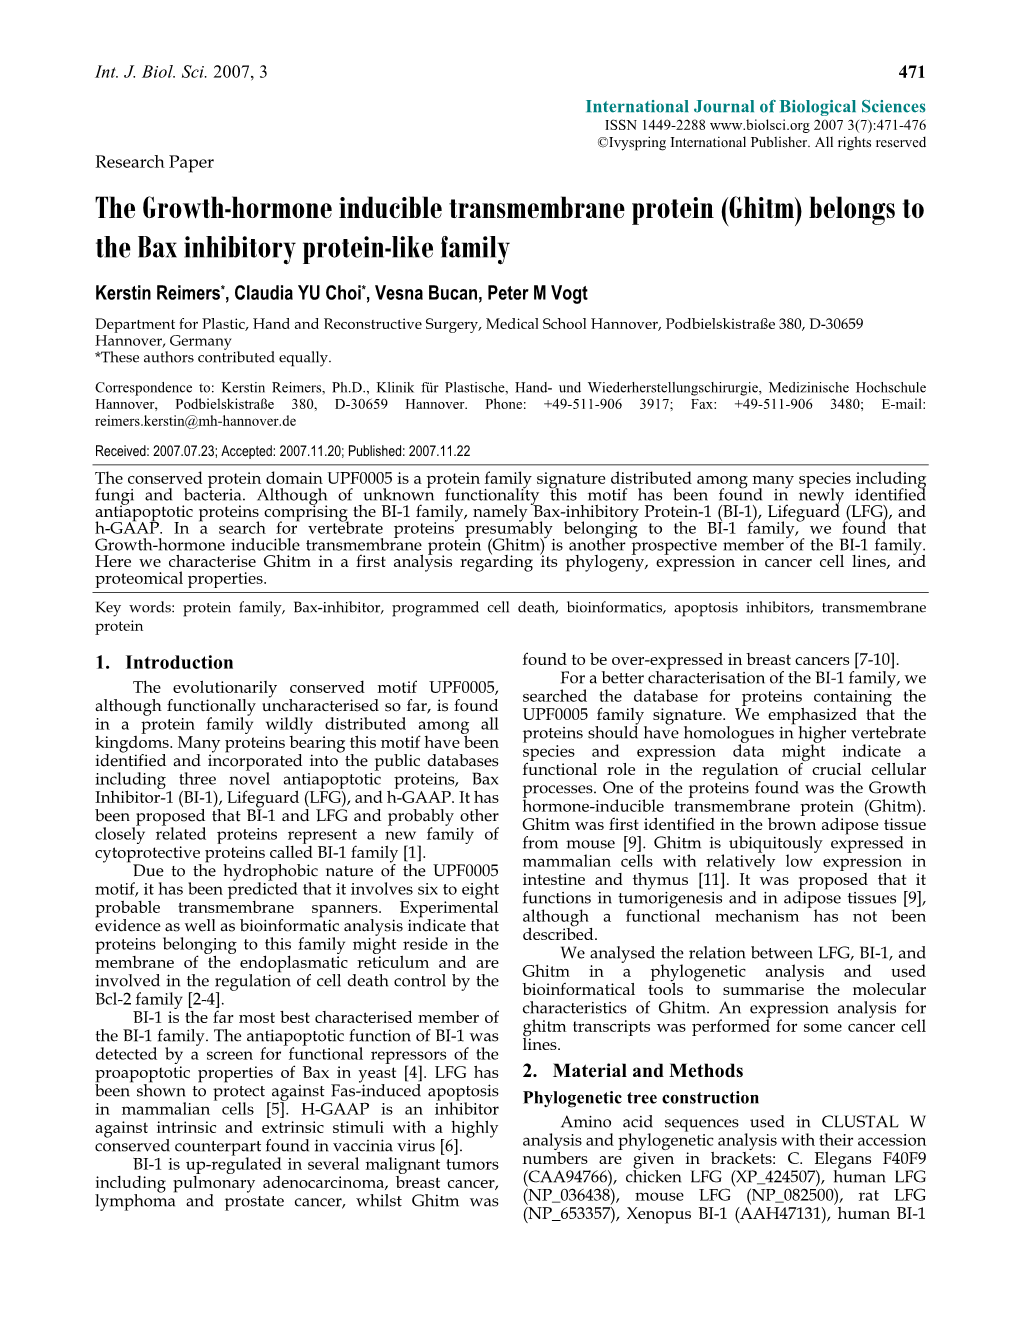 The Growth-Hormone Inducible Transmembrane Protein (Ghitm